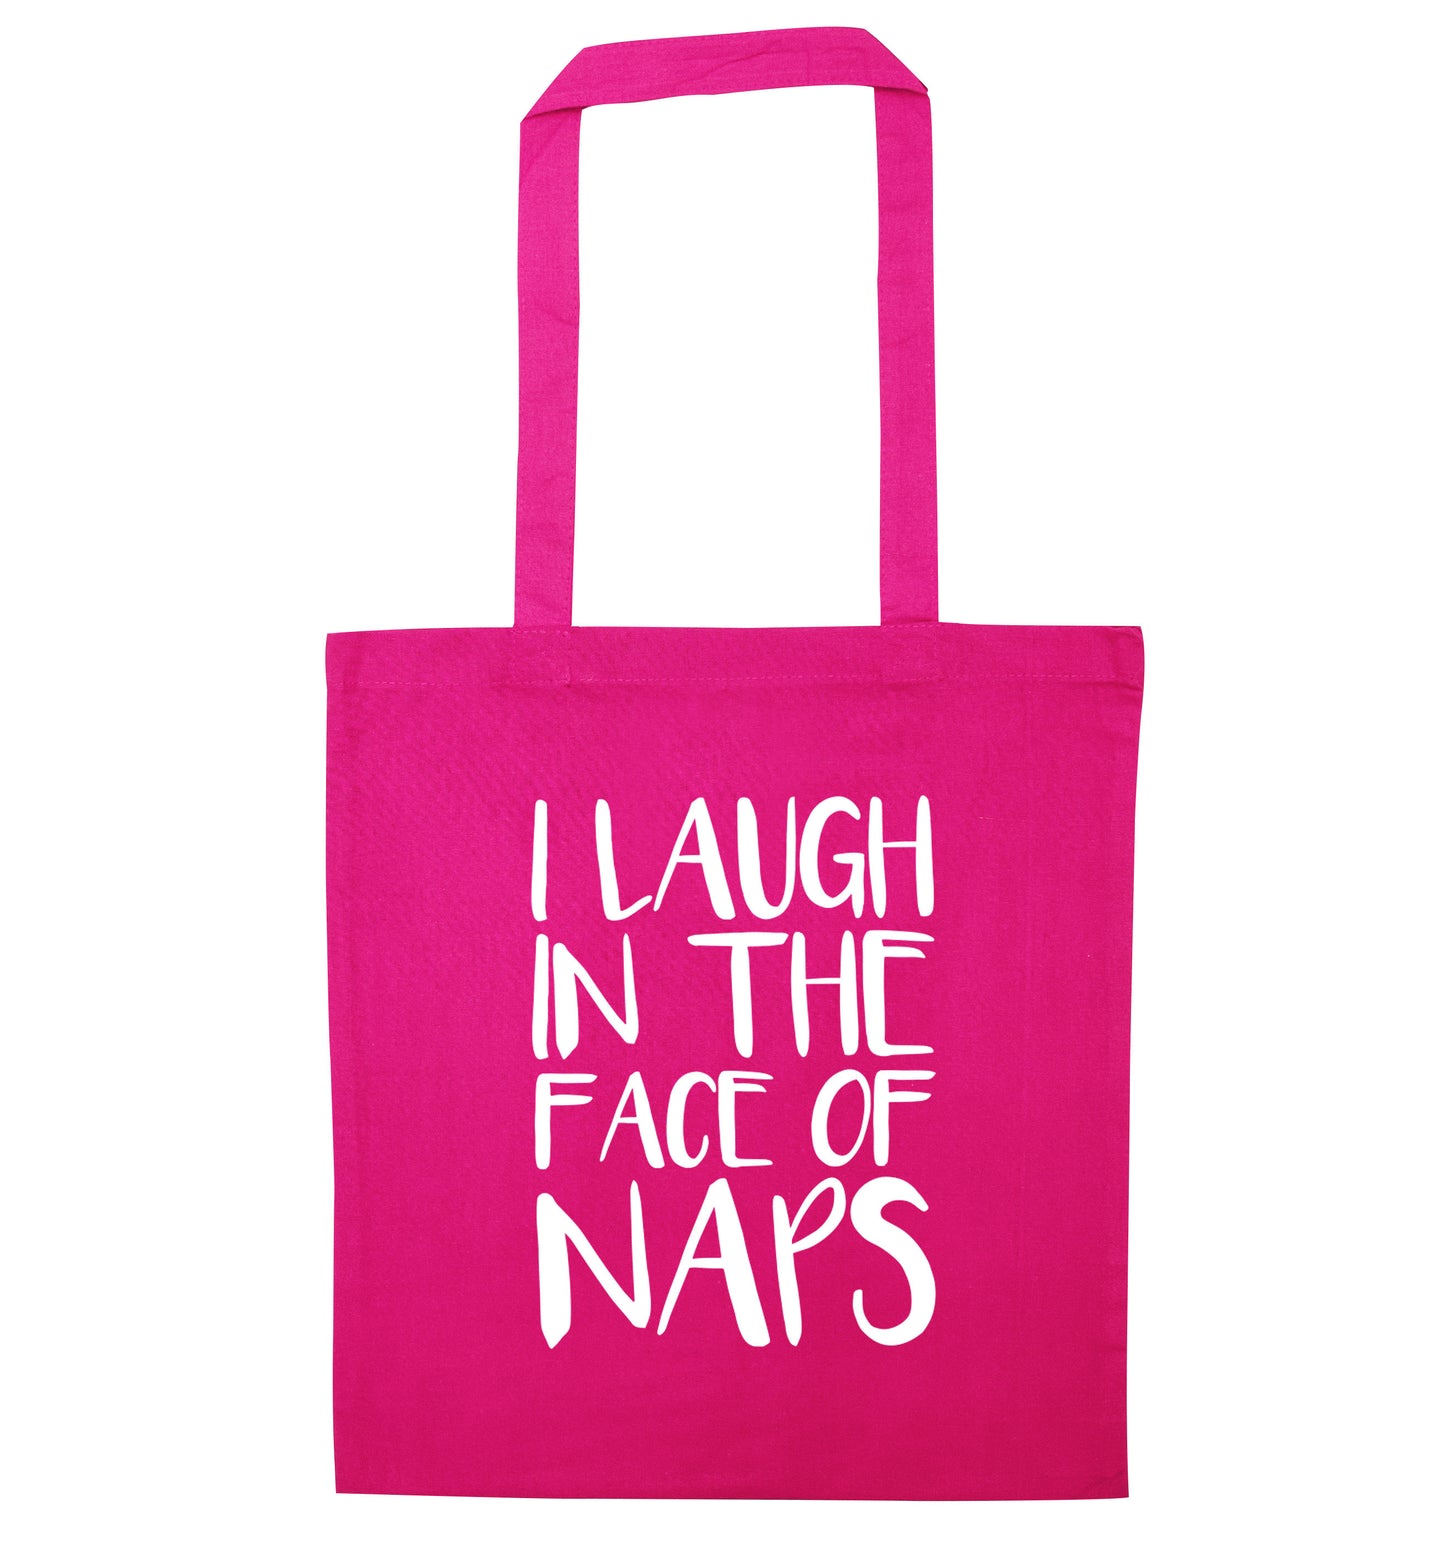 I laugh in the face of naps pink tote bag